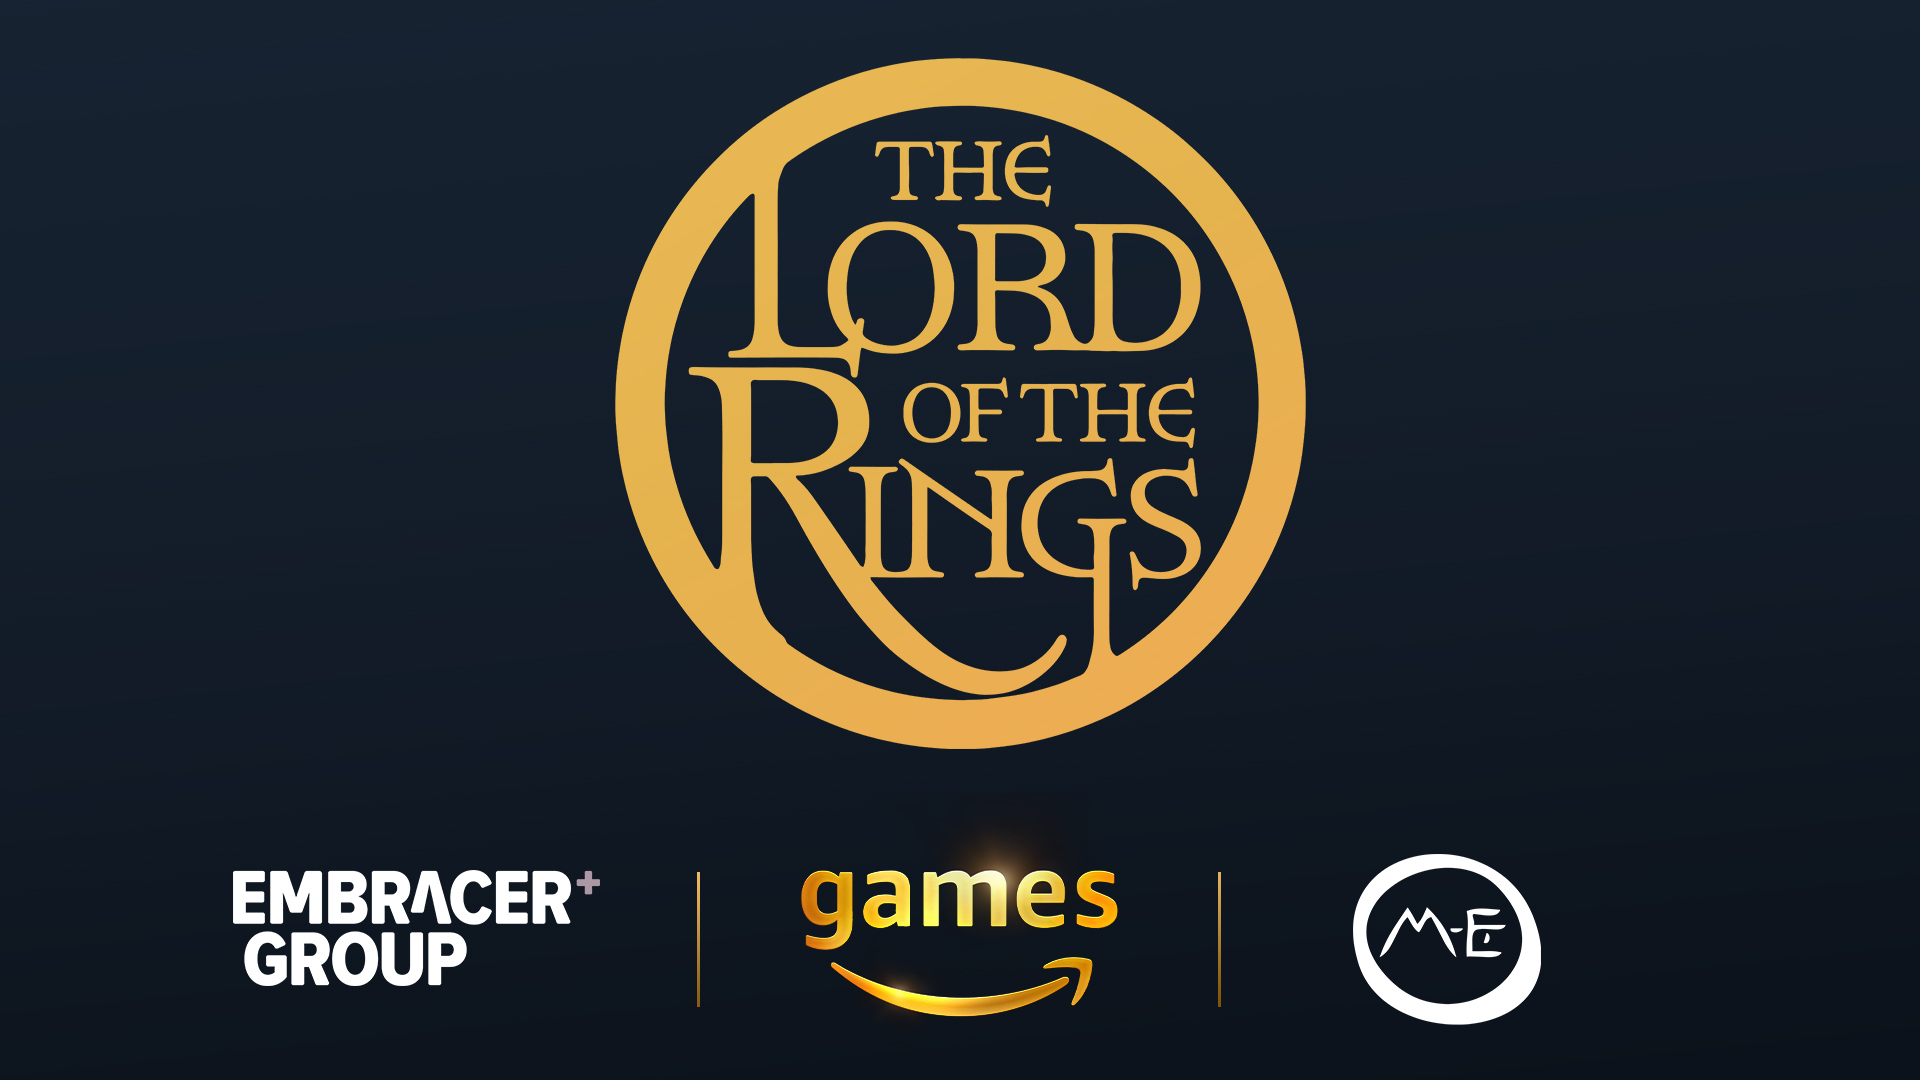 Amazon Games and Embracer Group Unite to Create a New ‘The Lord of the Rings’ MMORPG